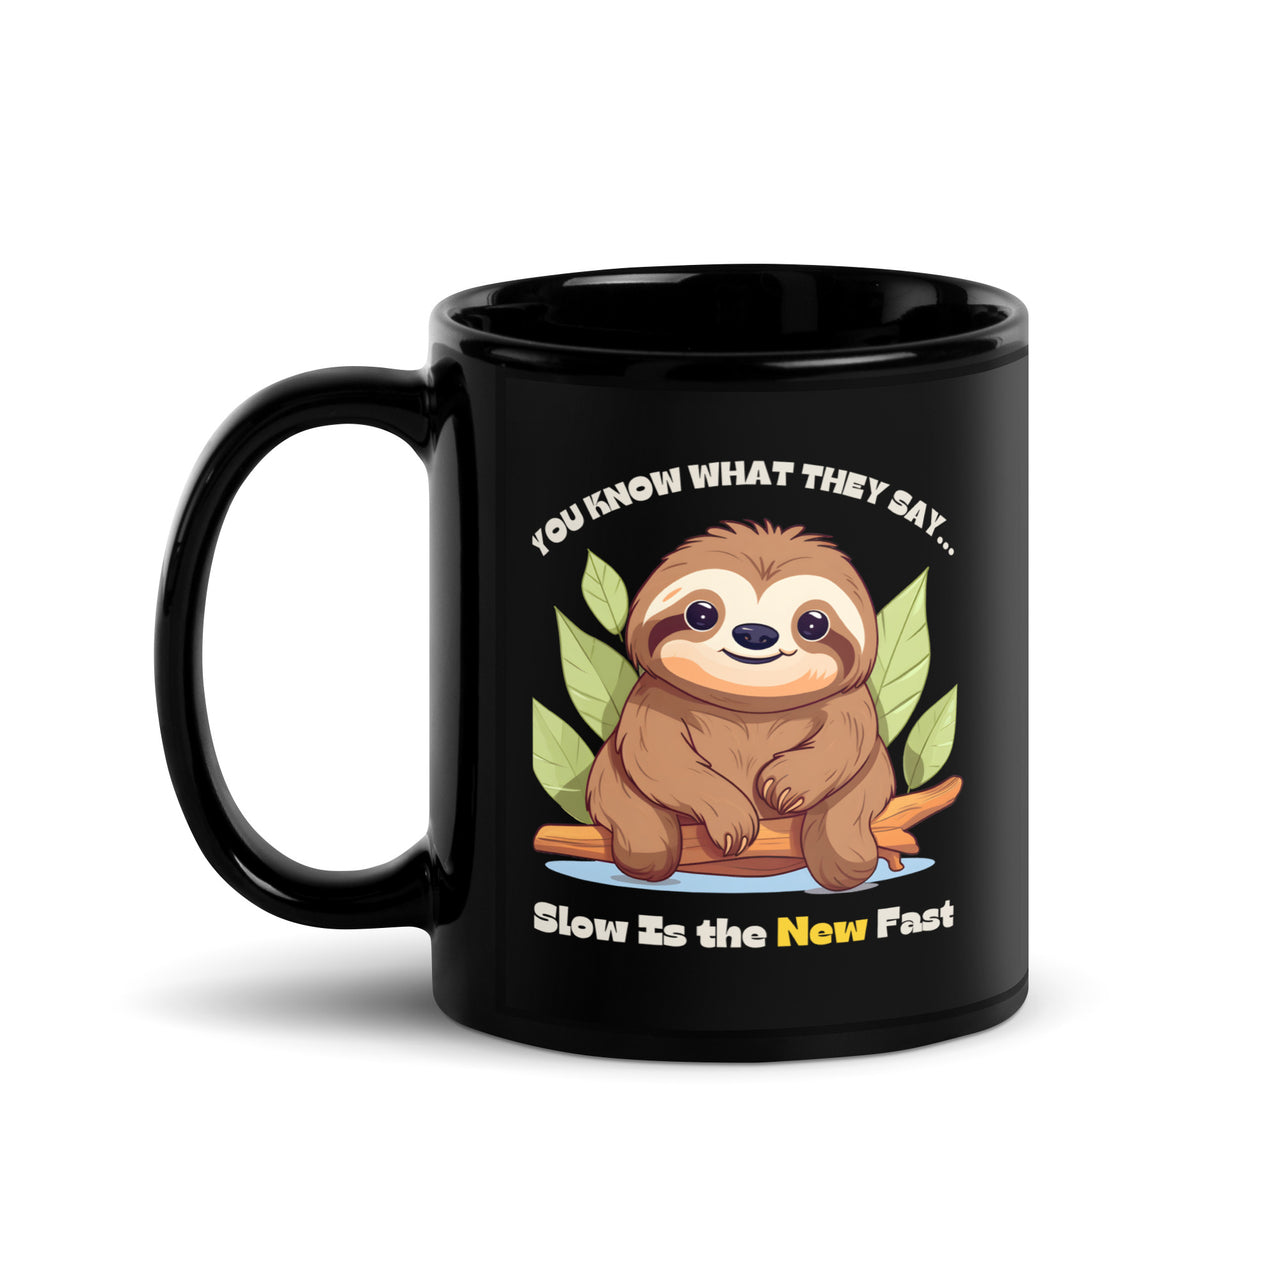 Slow is the New Fast Says the Sloth Black Mug